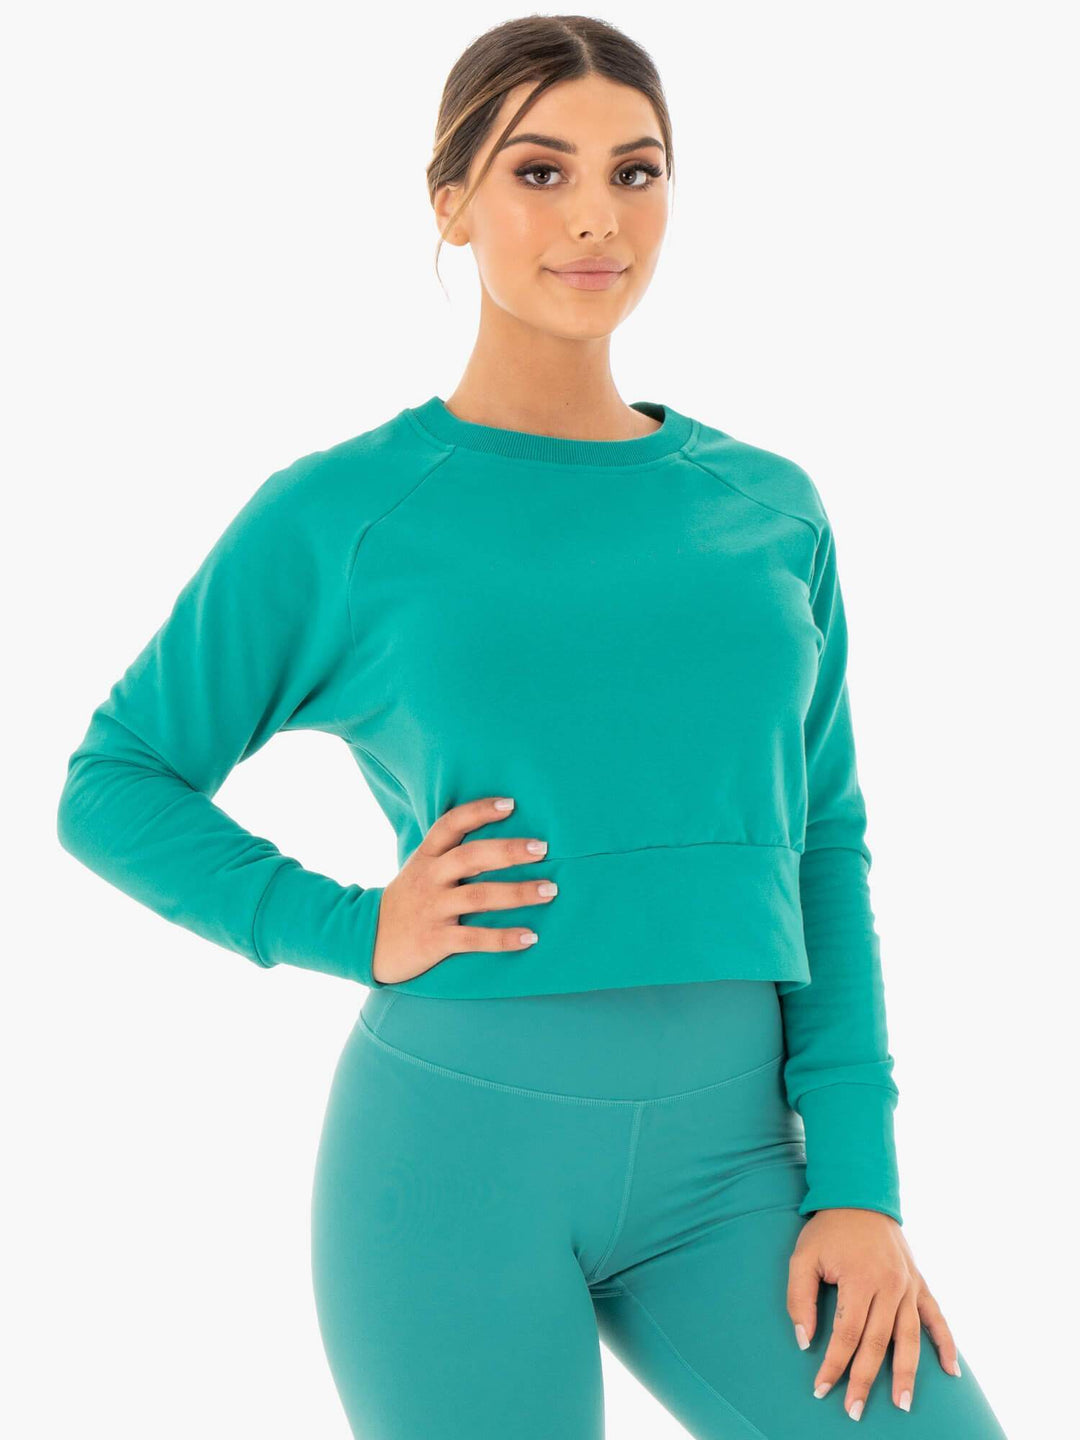 Motion Sweater - Teal Clothing Ryderwear 